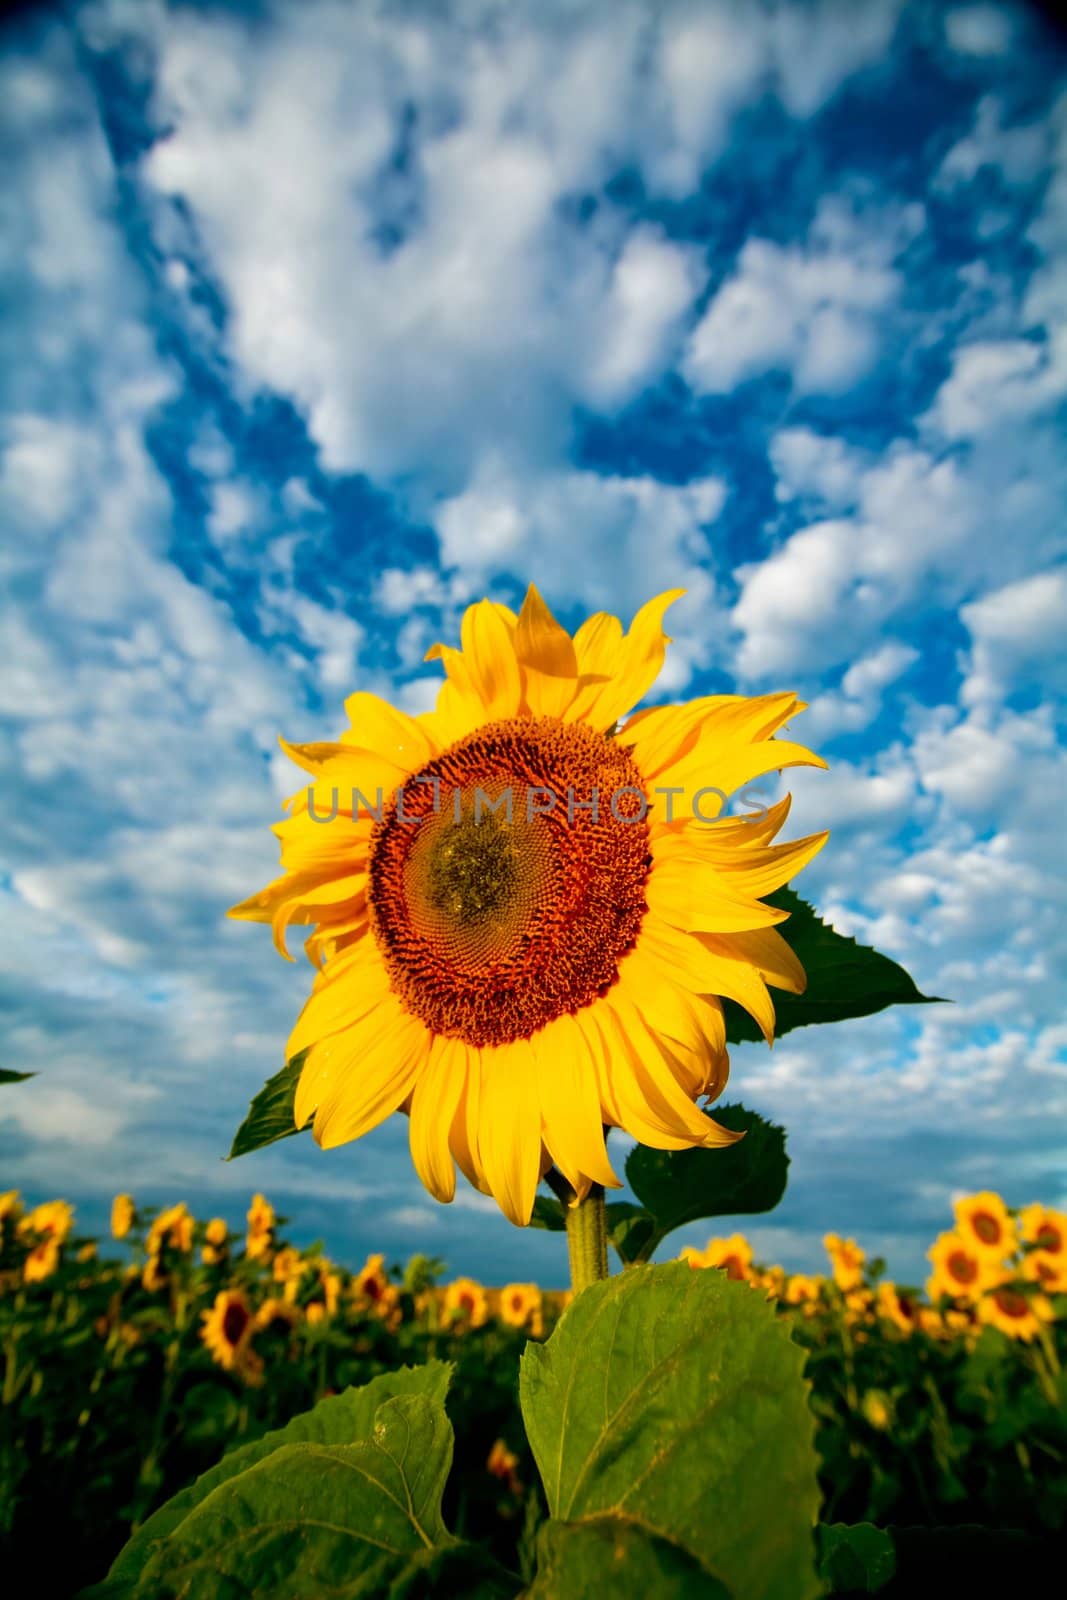 An image of yellow sunflower on dramatic background